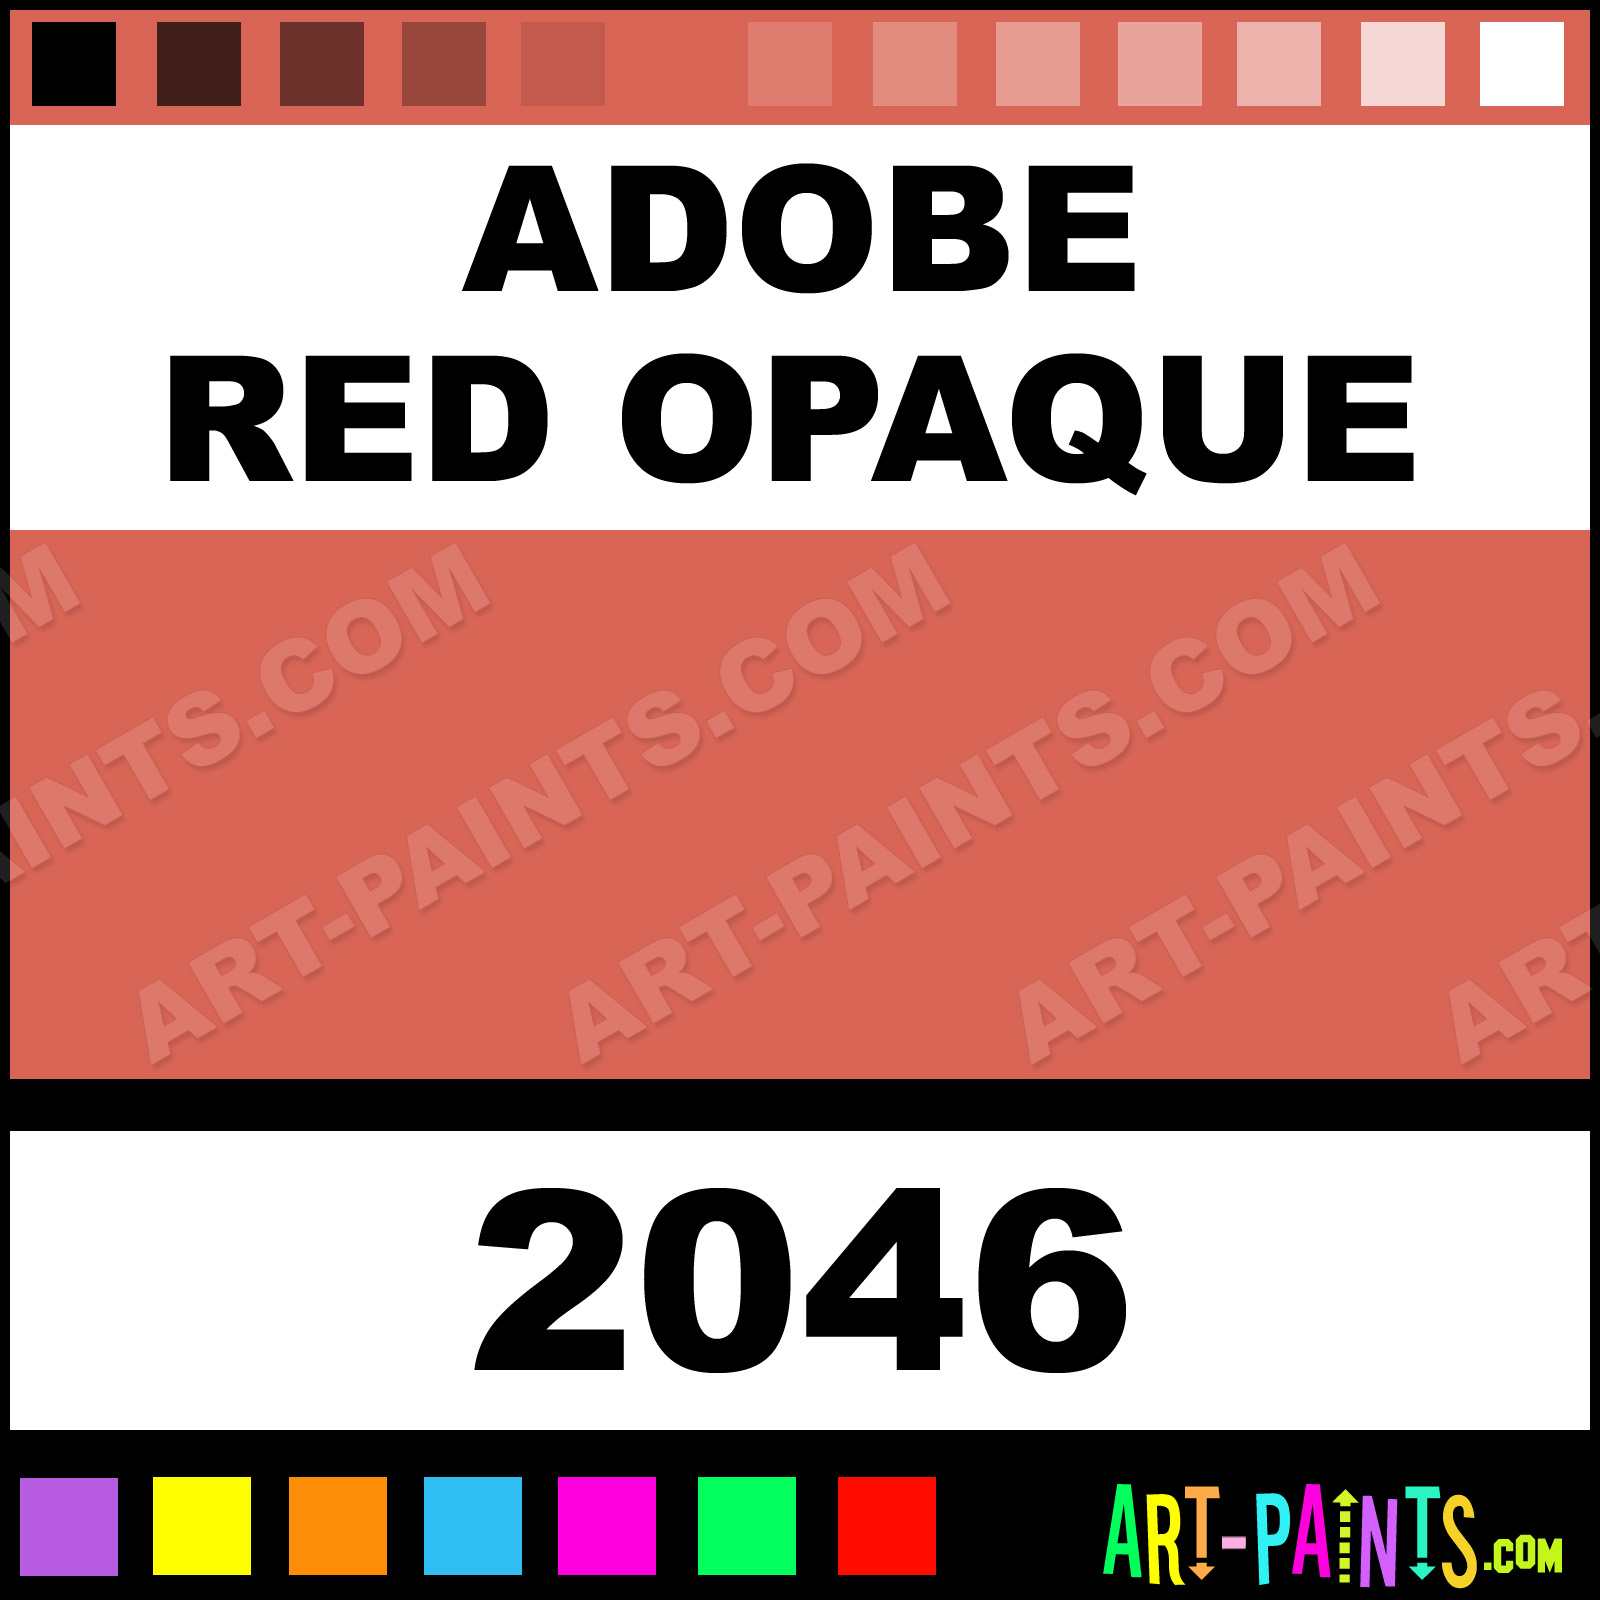 Adobe Red Opaque Ceramcoat Acrylic Paints - 2046 - Adobe Red Opaque Paint,  Adobe Red Opaque Color, Delta Ceramcoat Paint, D86455 